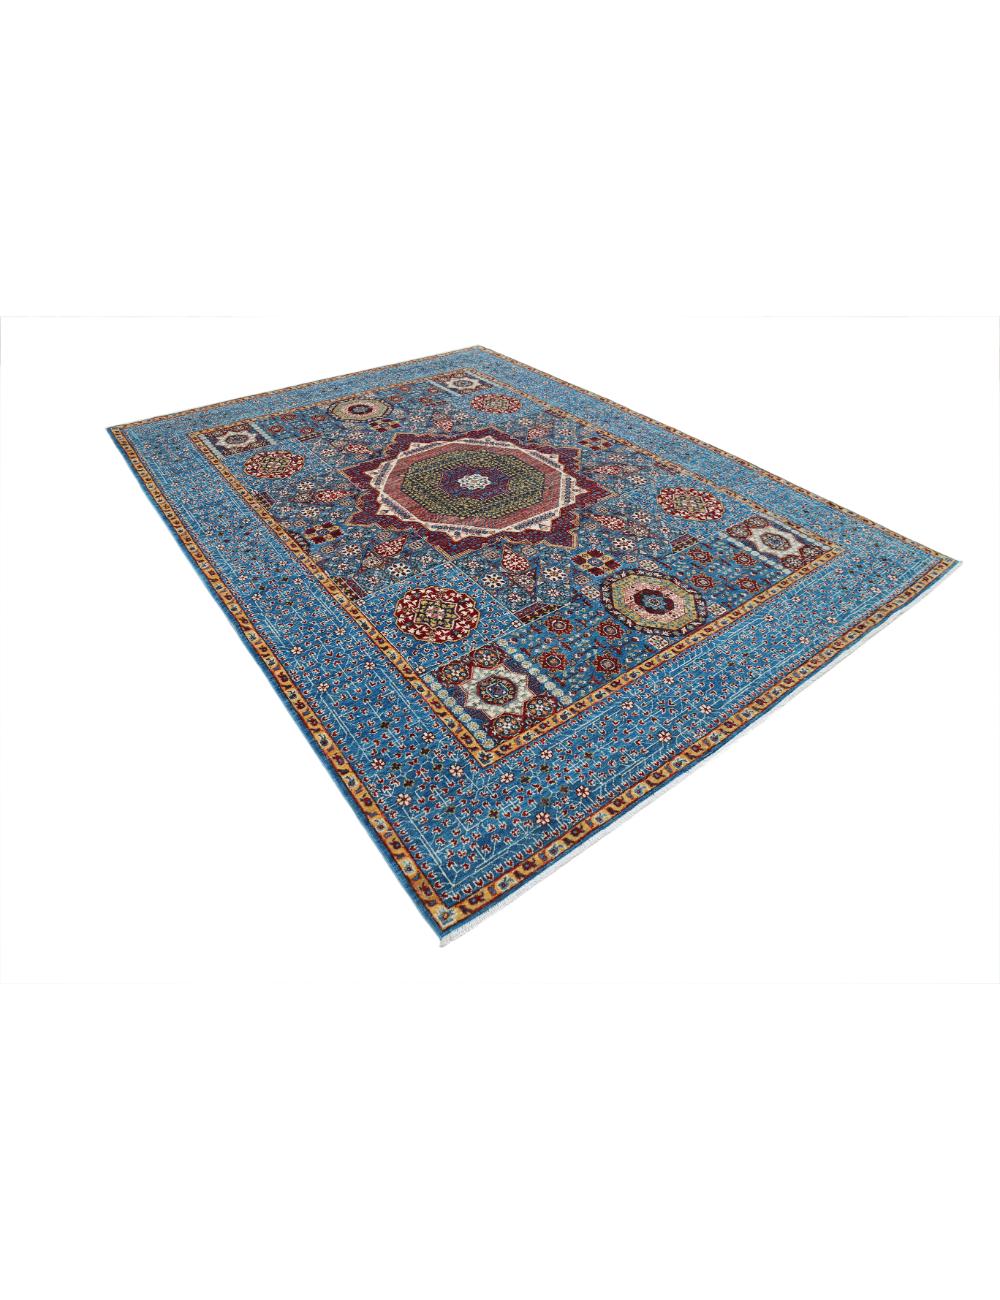 Mamluk 7' 11" X 10' 4" Hand-Knotted Wool Rug 7' 11" X 10' 4" (241 X 315) / Teal / Red